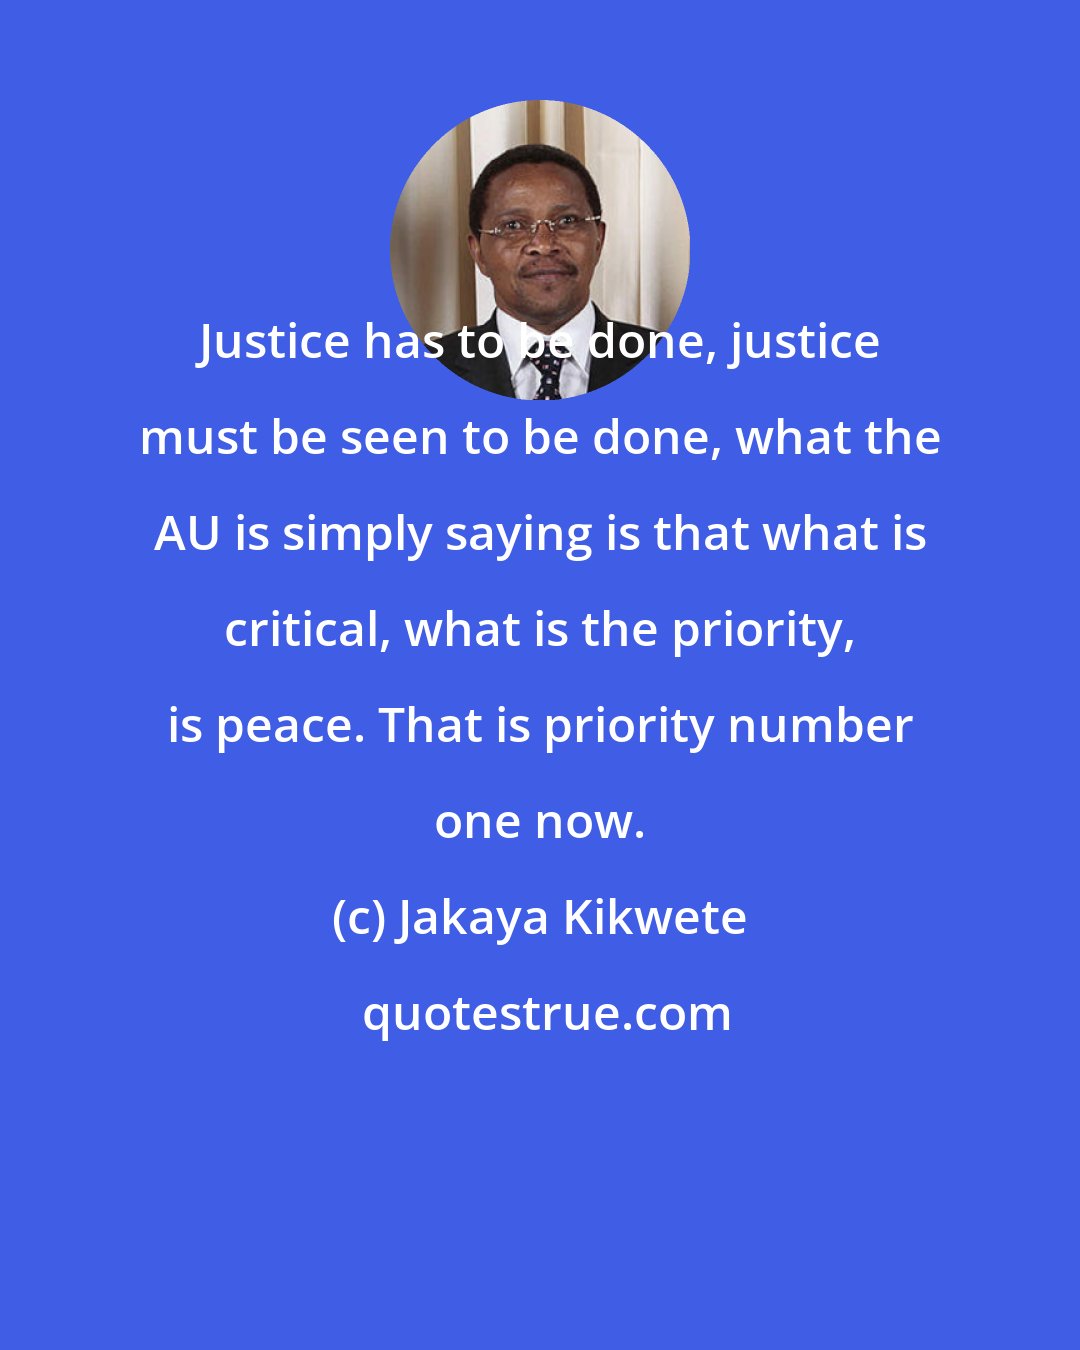 Jakaya Kikwete: Justice has to be done, justice must be seen to be done, what the AU is simply saying is that what is critical, what is the priority, is peace. That is priority number one now.